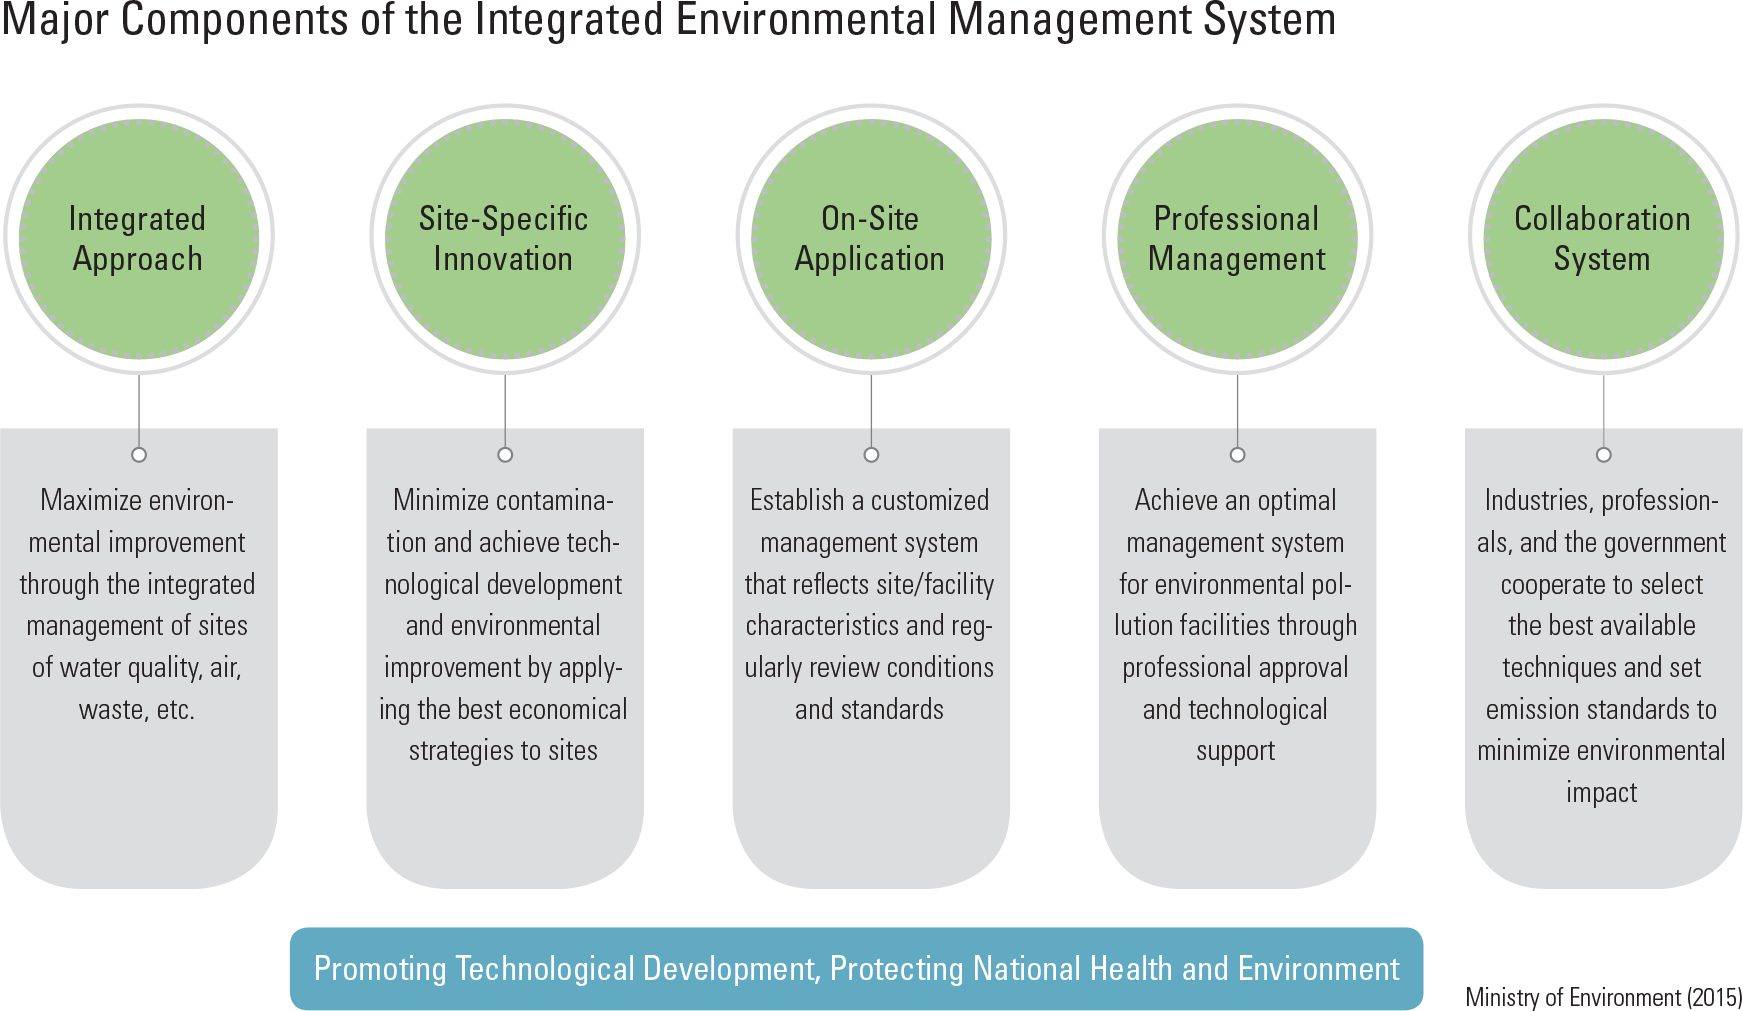 Major Components of the Integrated Environmental Management System